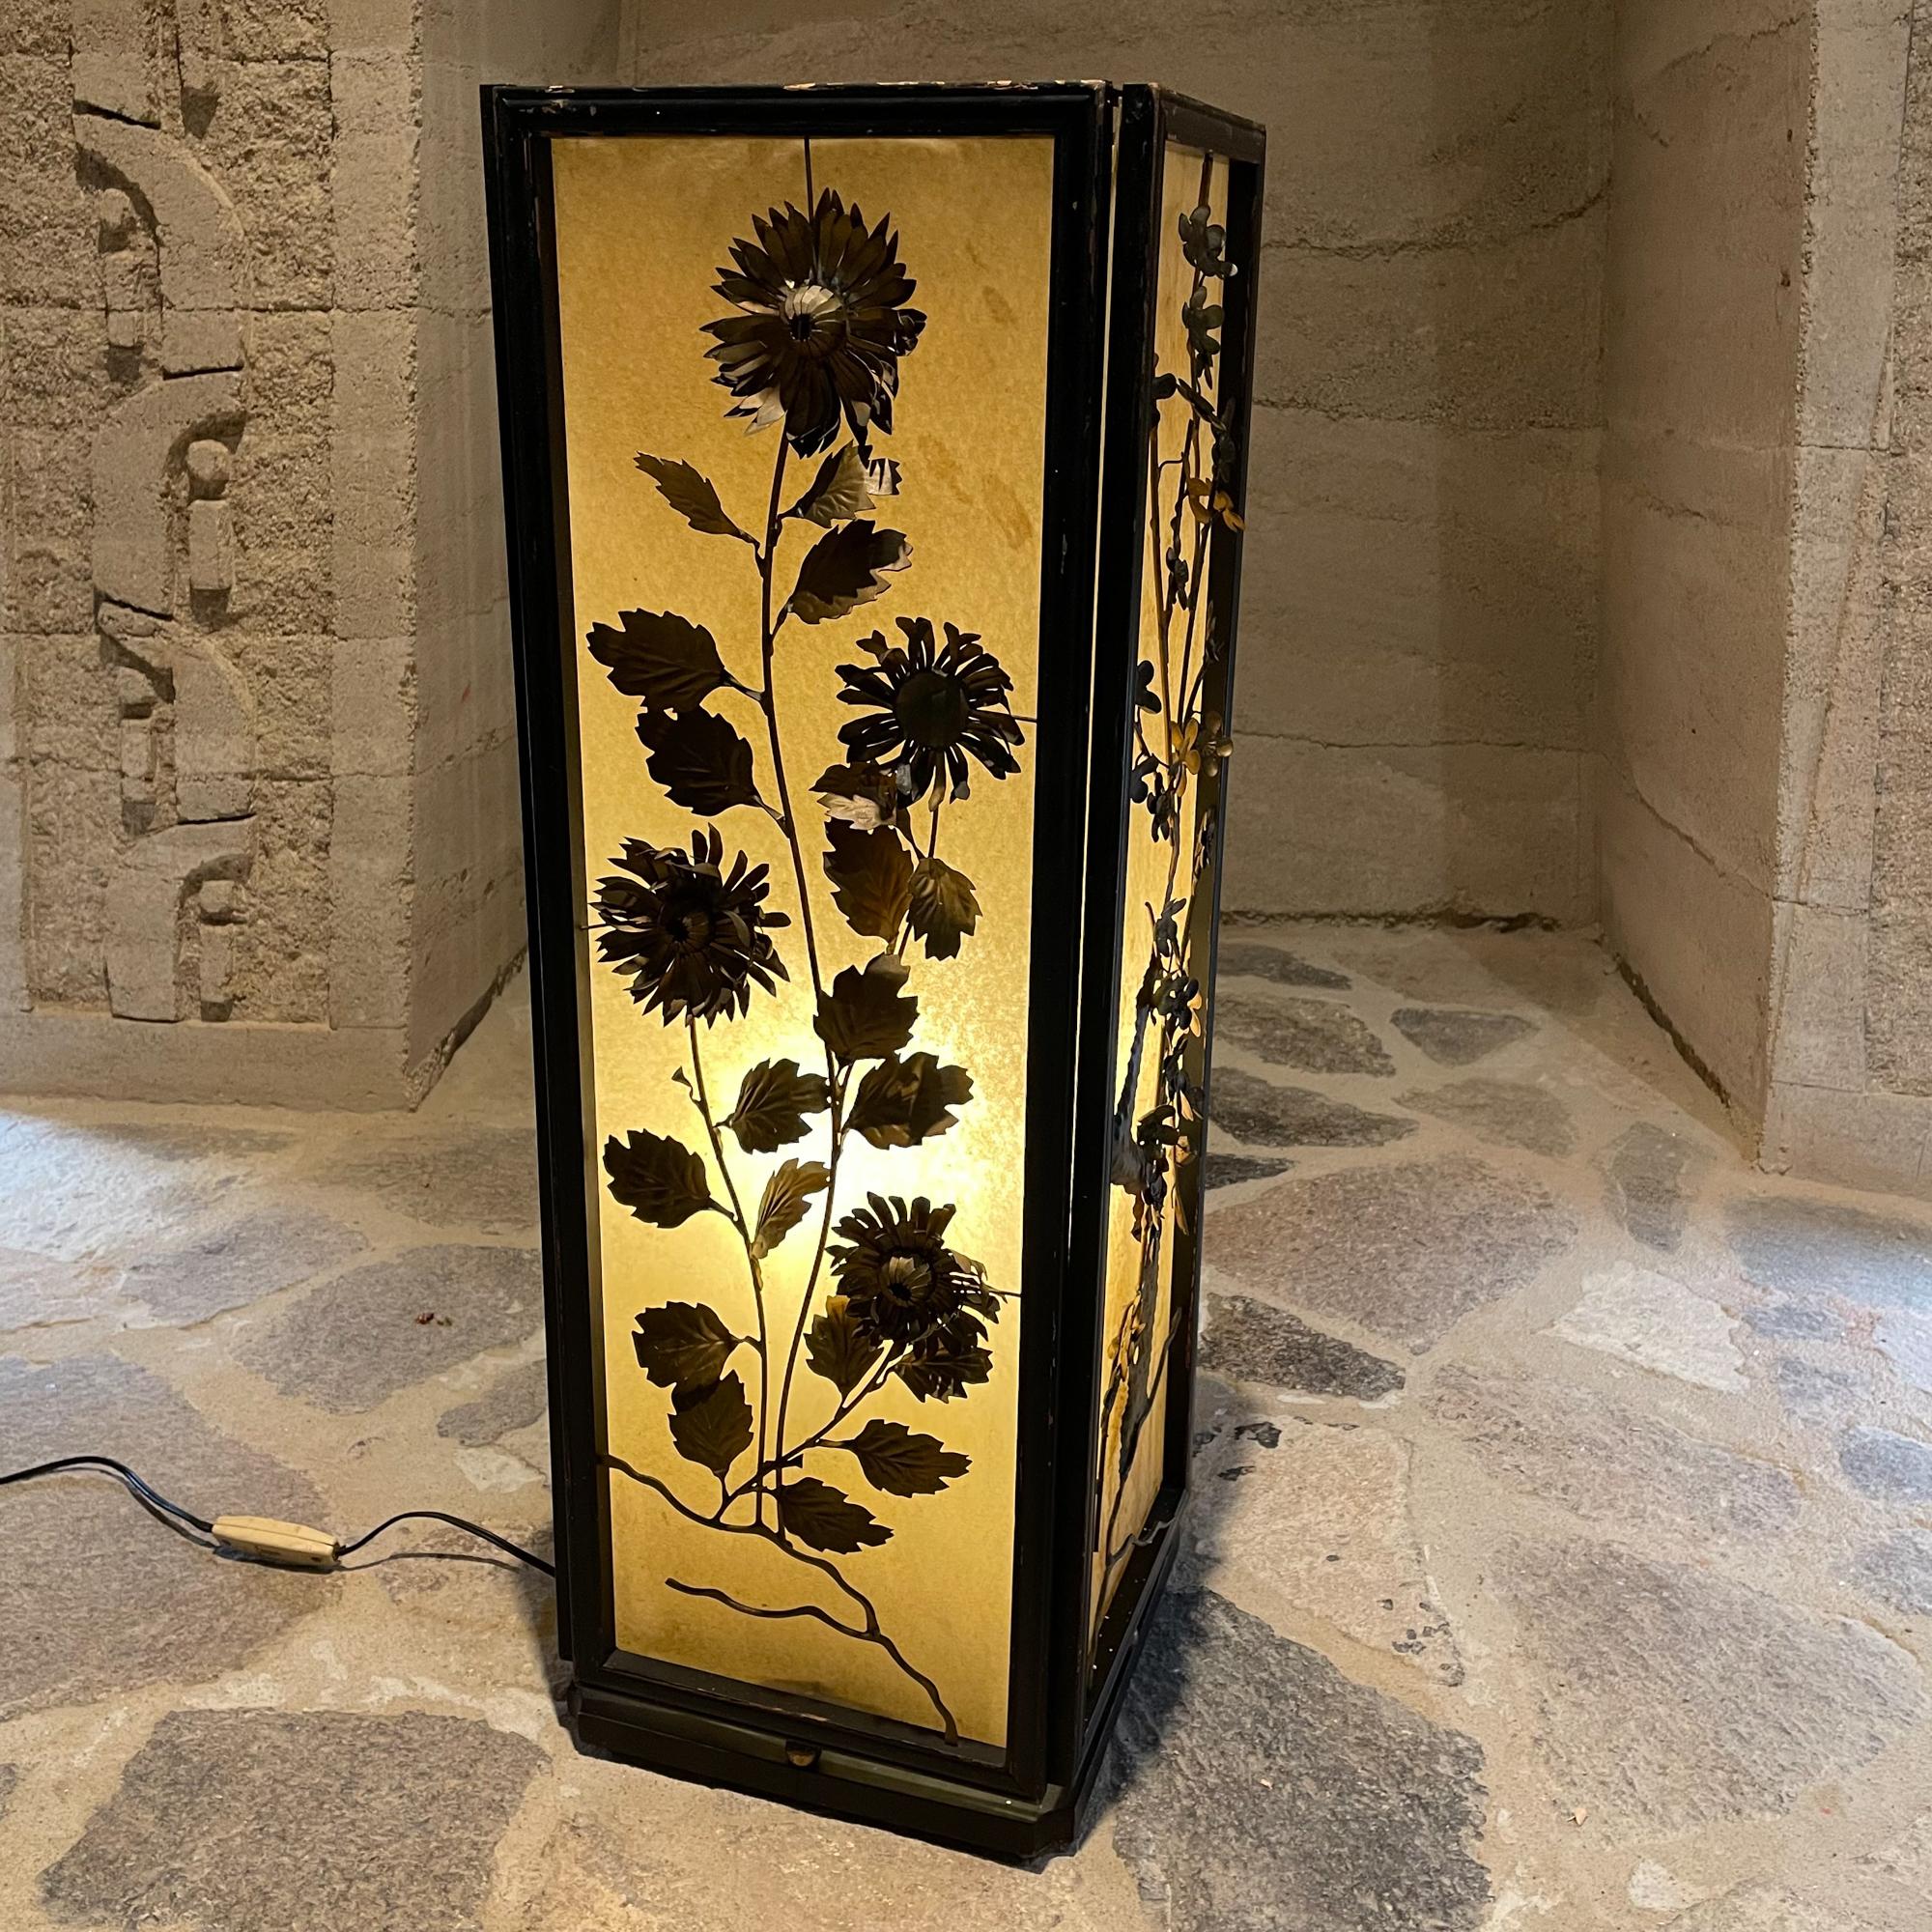 1960s Regency Modern: Japanese lantern lamp with four sides each with a decorative floral design crafted in Brass. Yellowish plastic laminate shade exterior. Wood frame
Each panel design is unique. See images!
Unmarked.
Measures: 31.75 H x 11 x